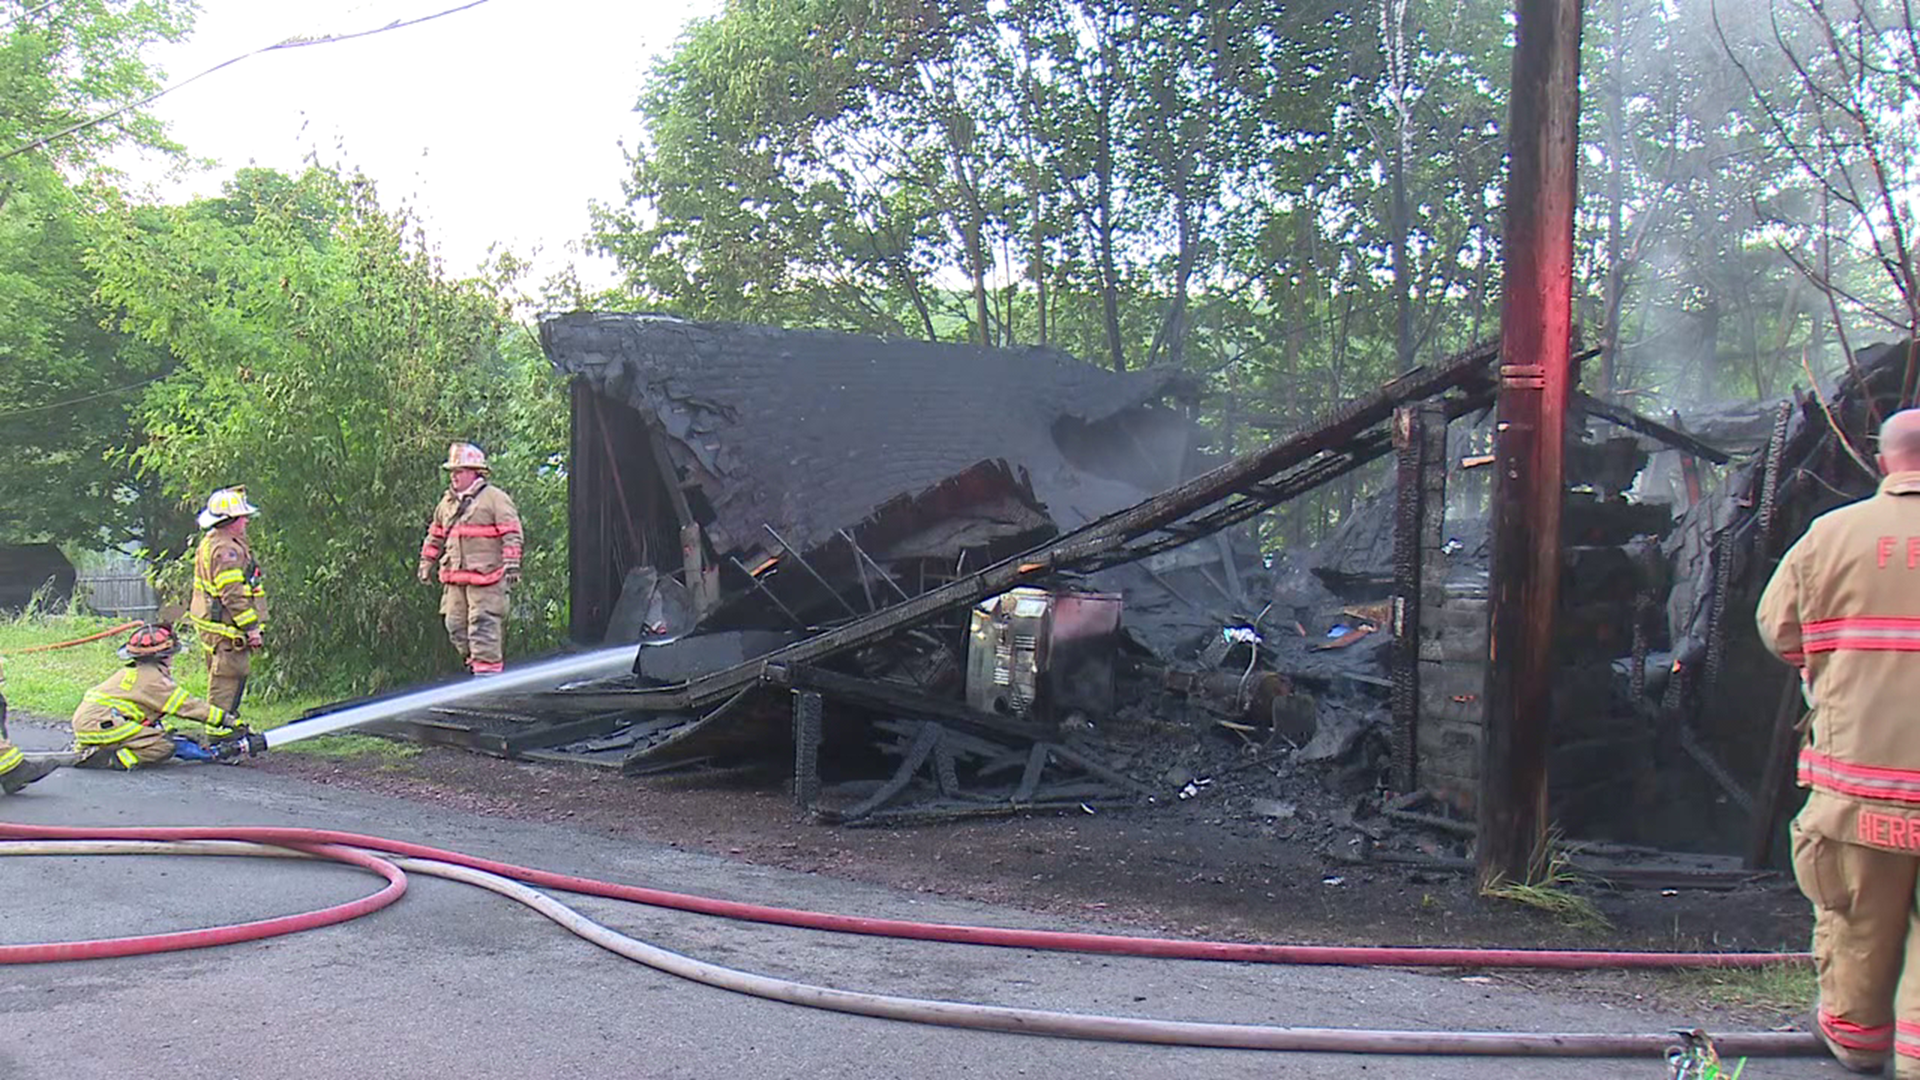 Two nearby homes were also damaged; the heat from the fire melted siding on both buildings.